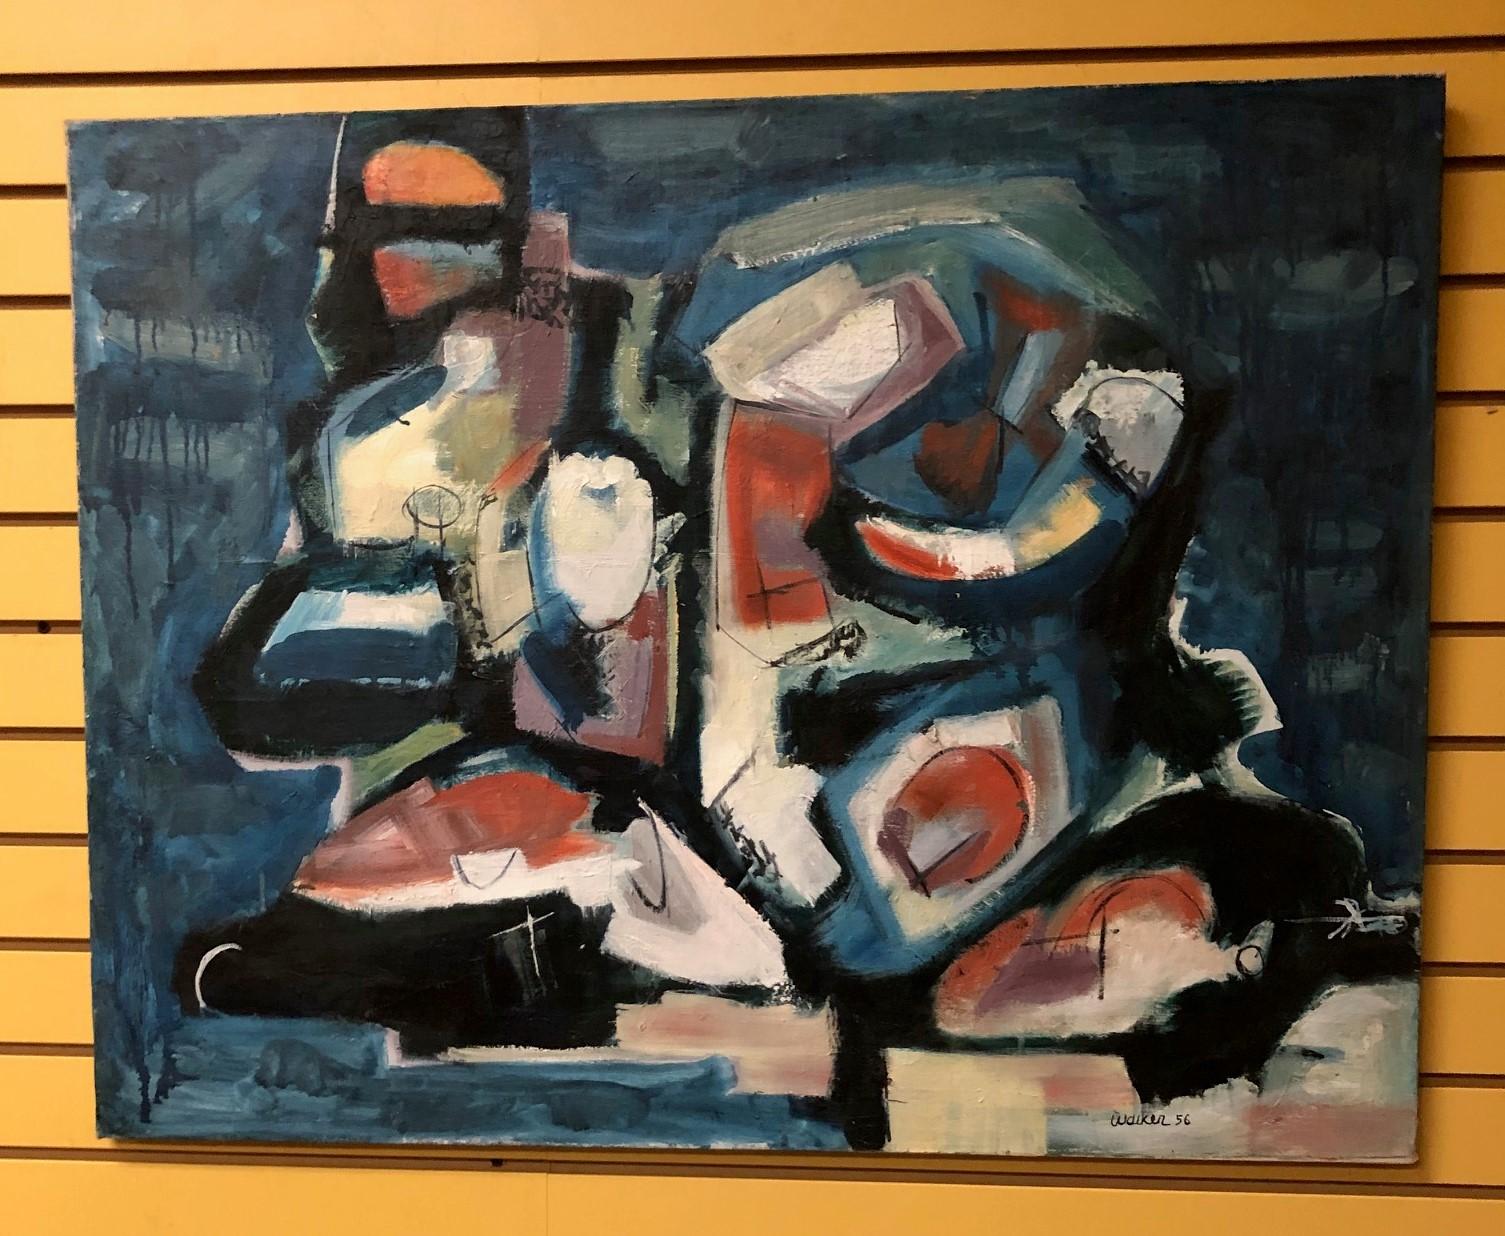 Original midcentury abstract oil on canvas painting by Clay Walker, circa 1956. 

Clay Walker, born in 1924 in Kentucky. Walker exhibited with Picasso, Warhol, Rauschenberg, etc.; he has shown in over 200 US and international exhibitions and he